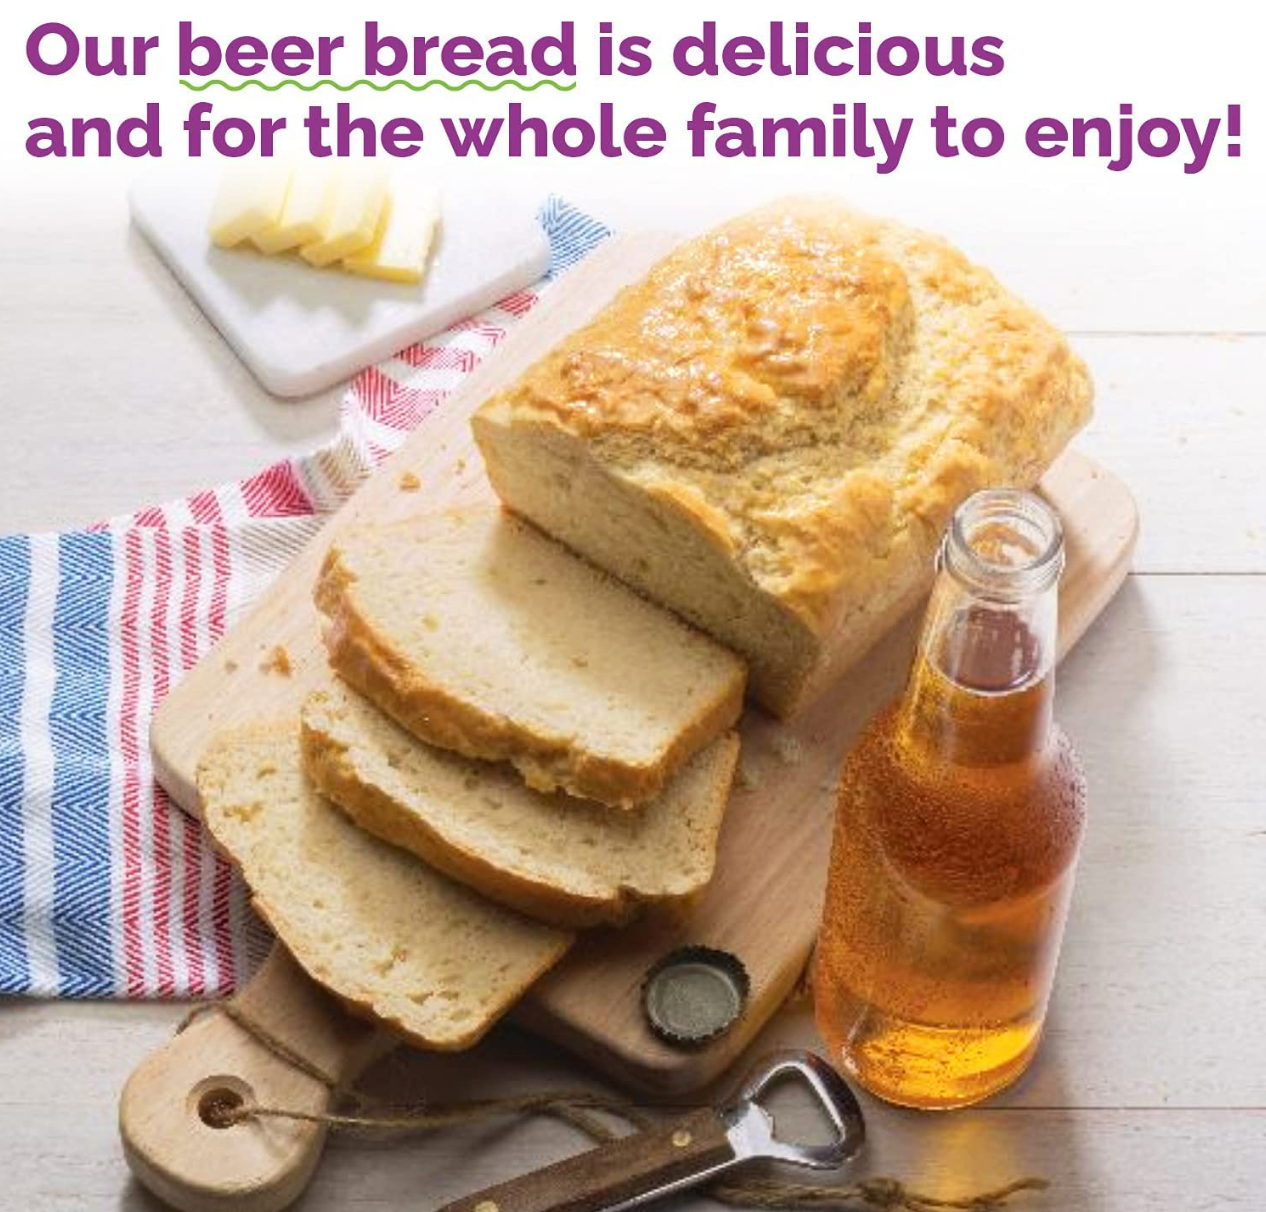 Our beer bread is delicious and for the whole family to enjoy!